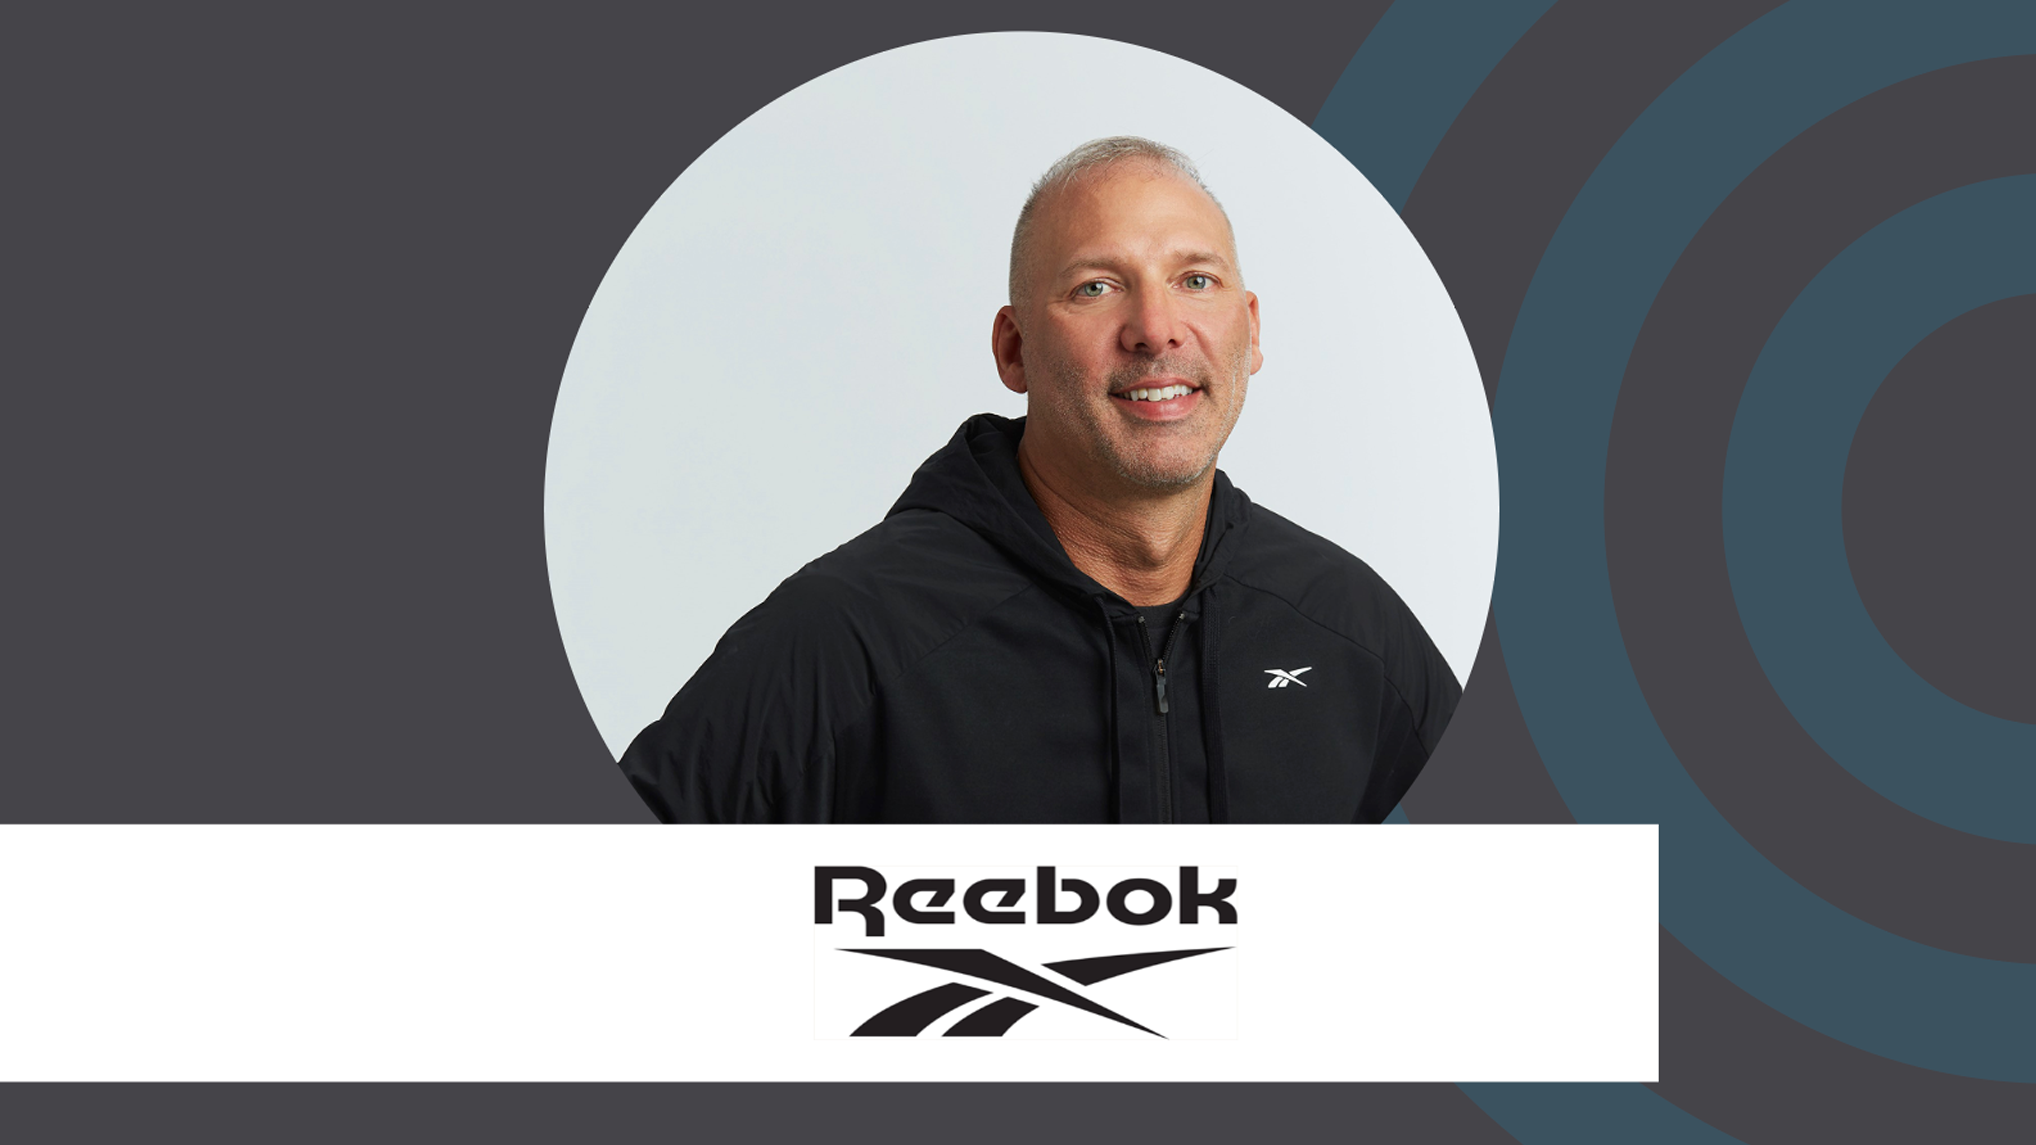 Transparently poverty Cucumber Long-Time Reebok Exec, Todd Krinsky, Named New CEO | License Global